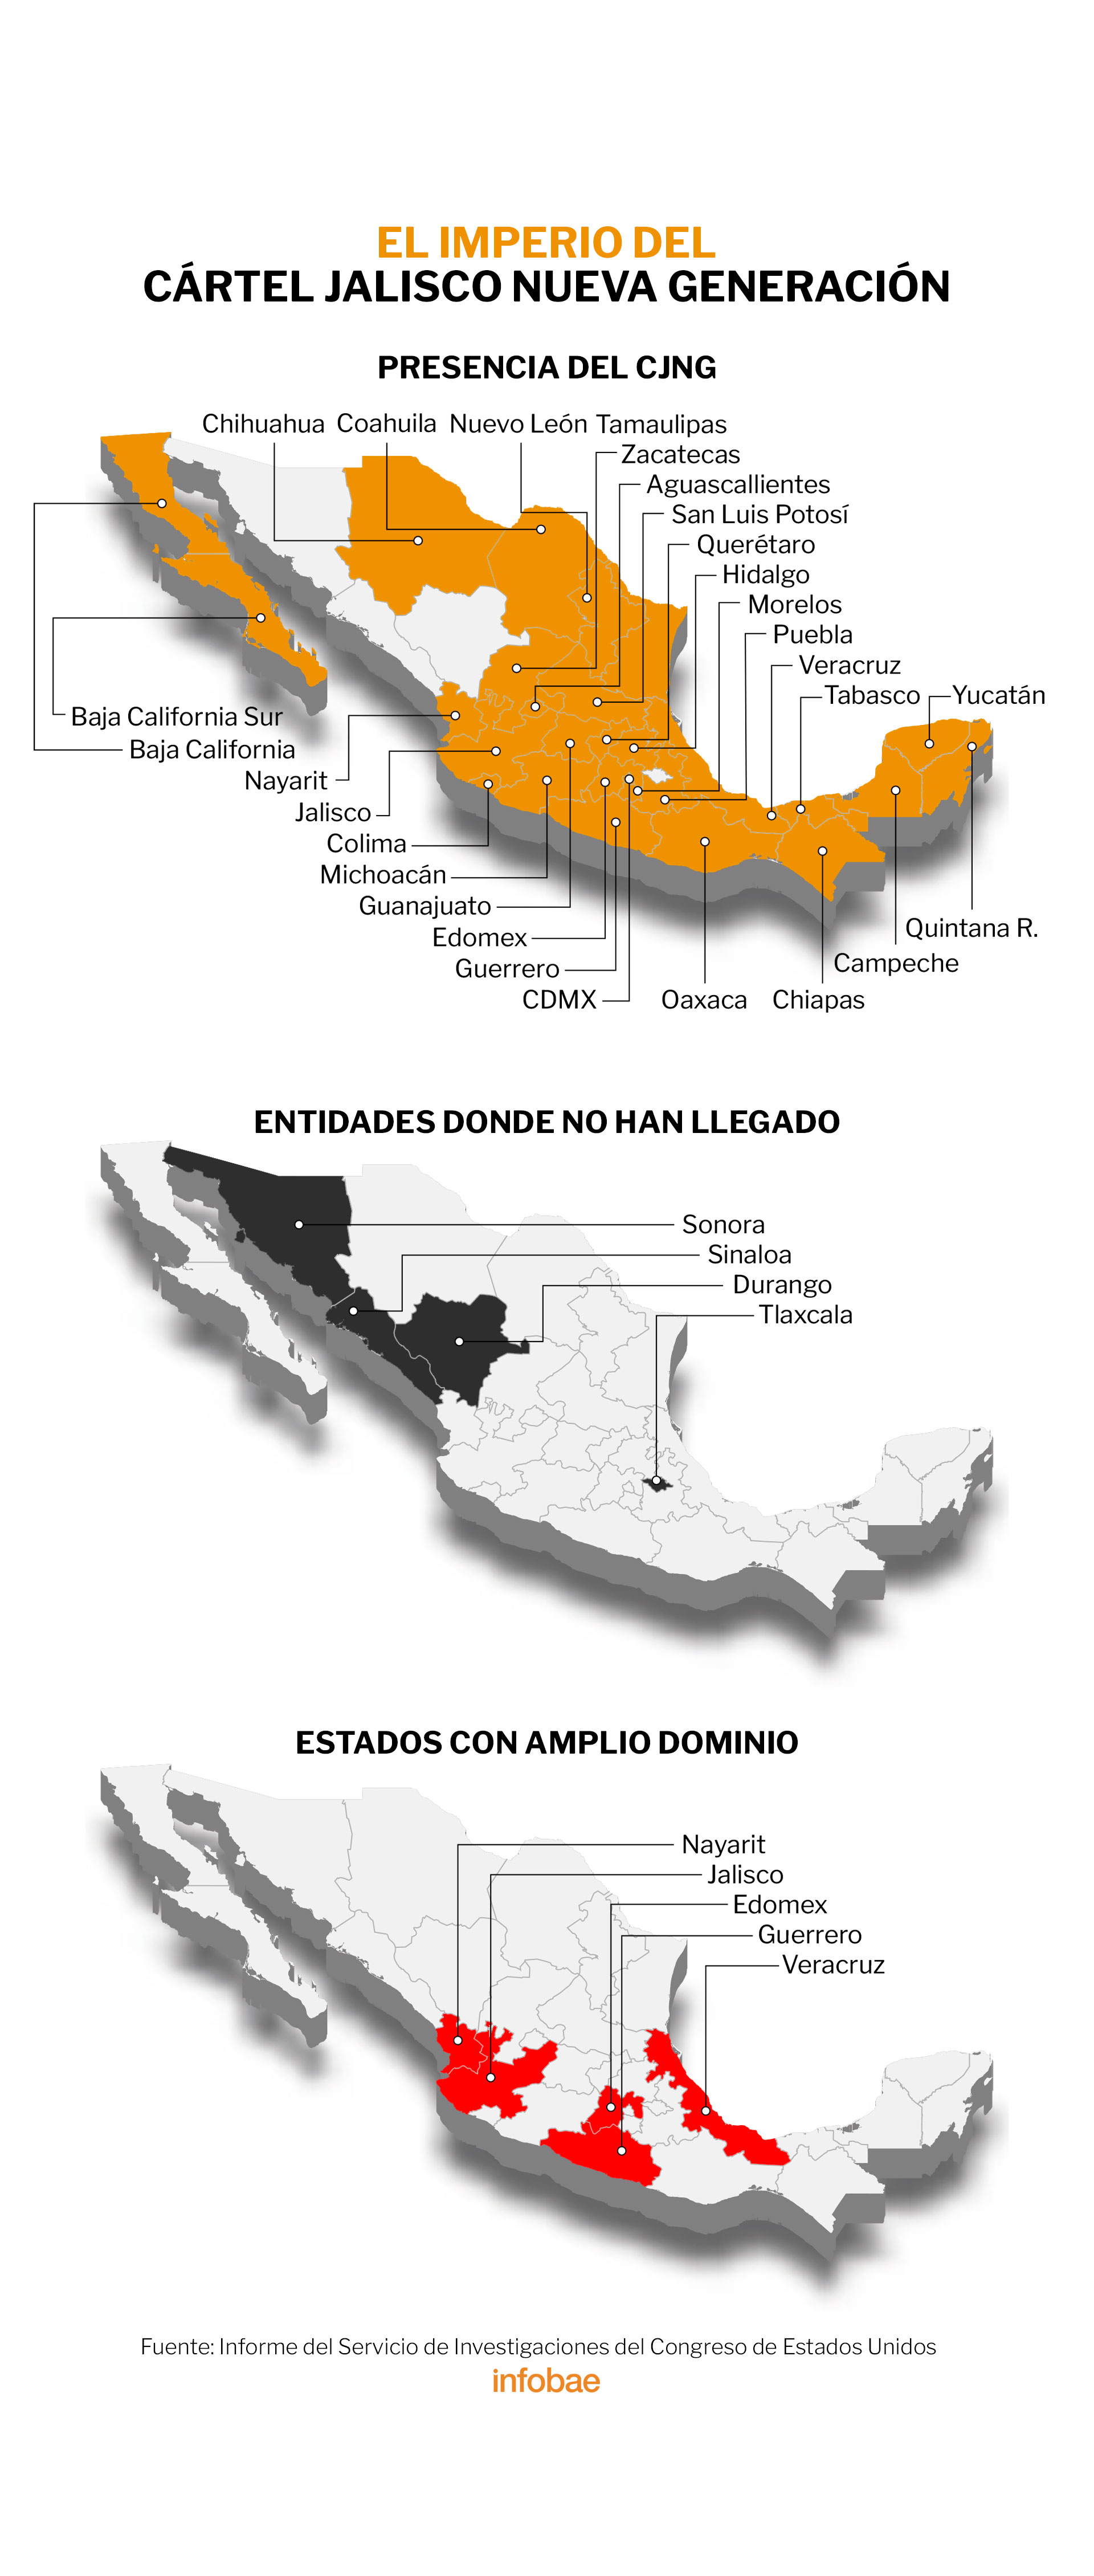 The CJNG has expanded in 28 of the 32 states of the country 